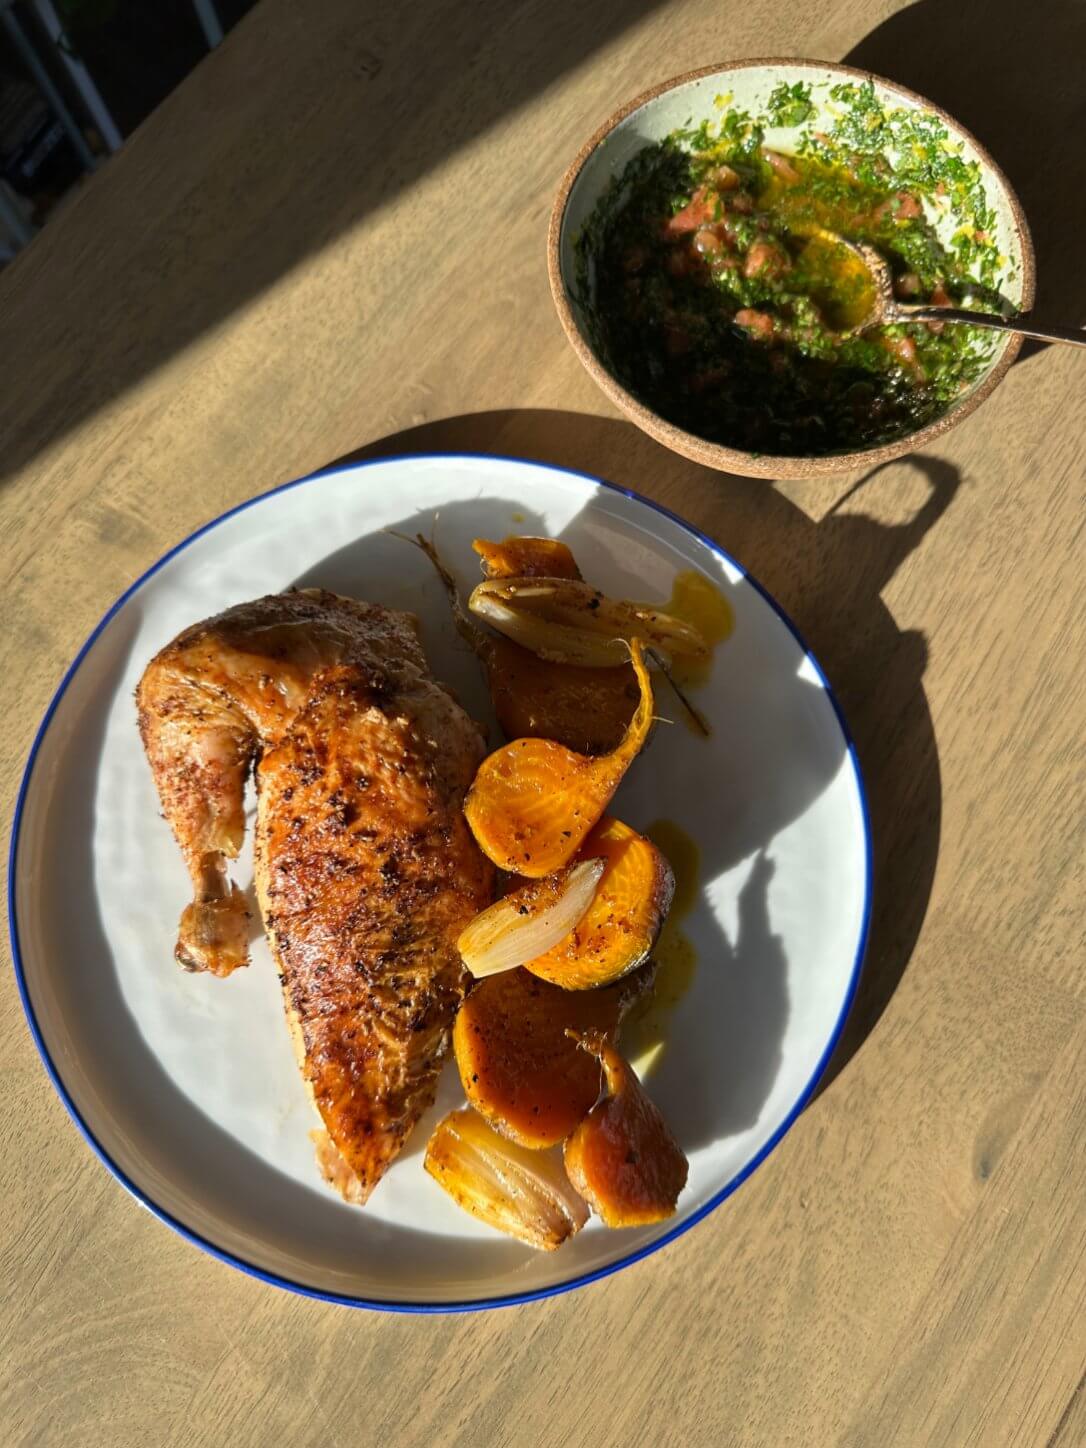 Roast Chicken and Golden Beets with Chunky Orange Vinaigrette